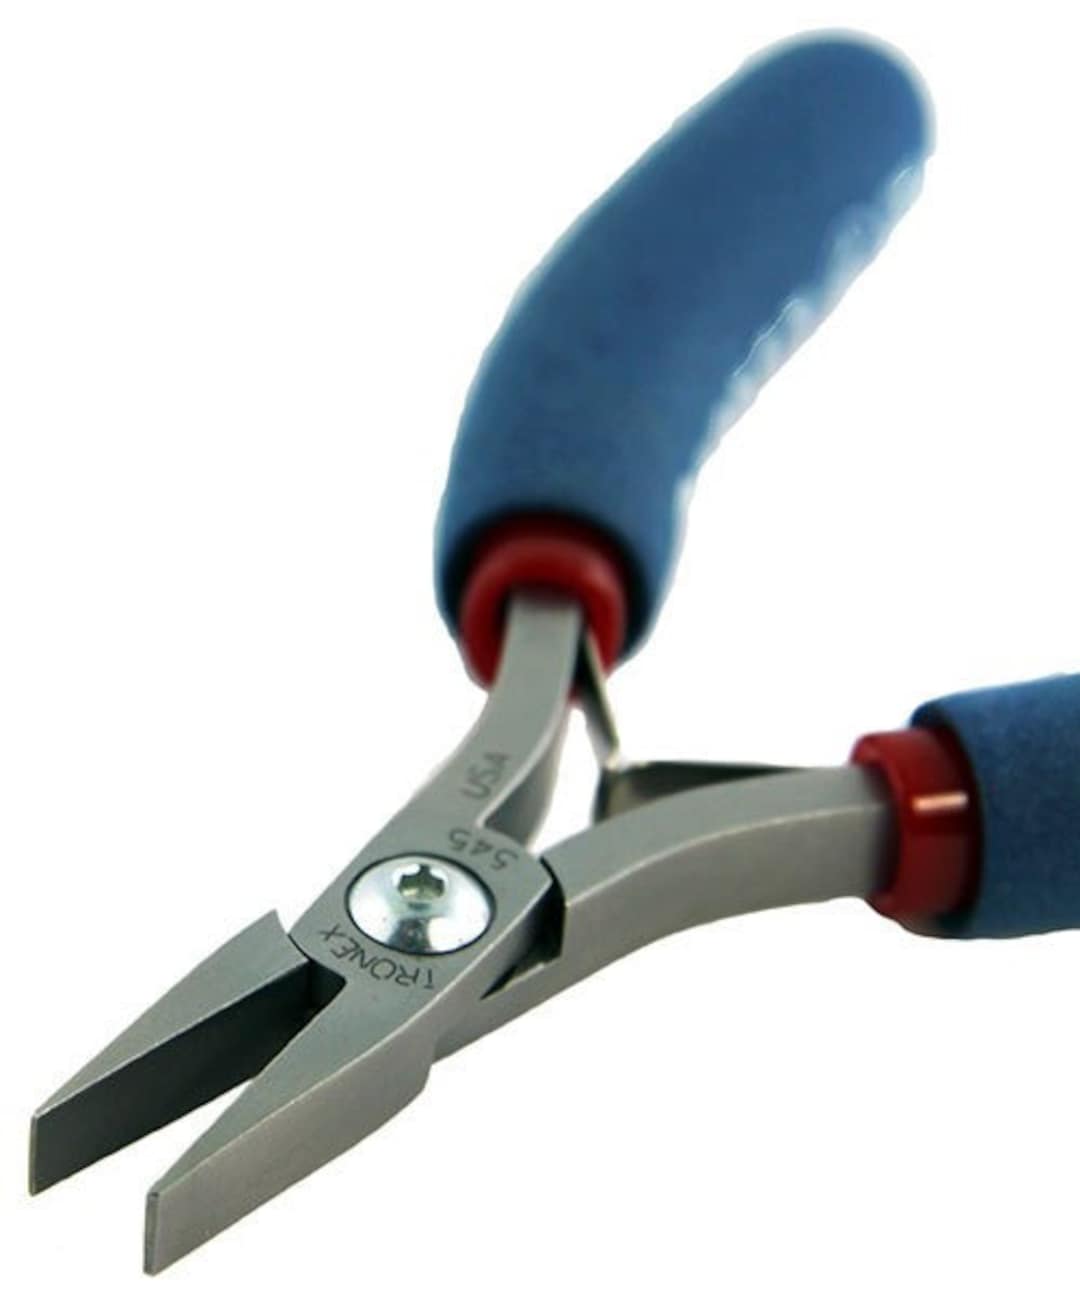 Tronex - P531 Round Nose Pliers Long Jaw